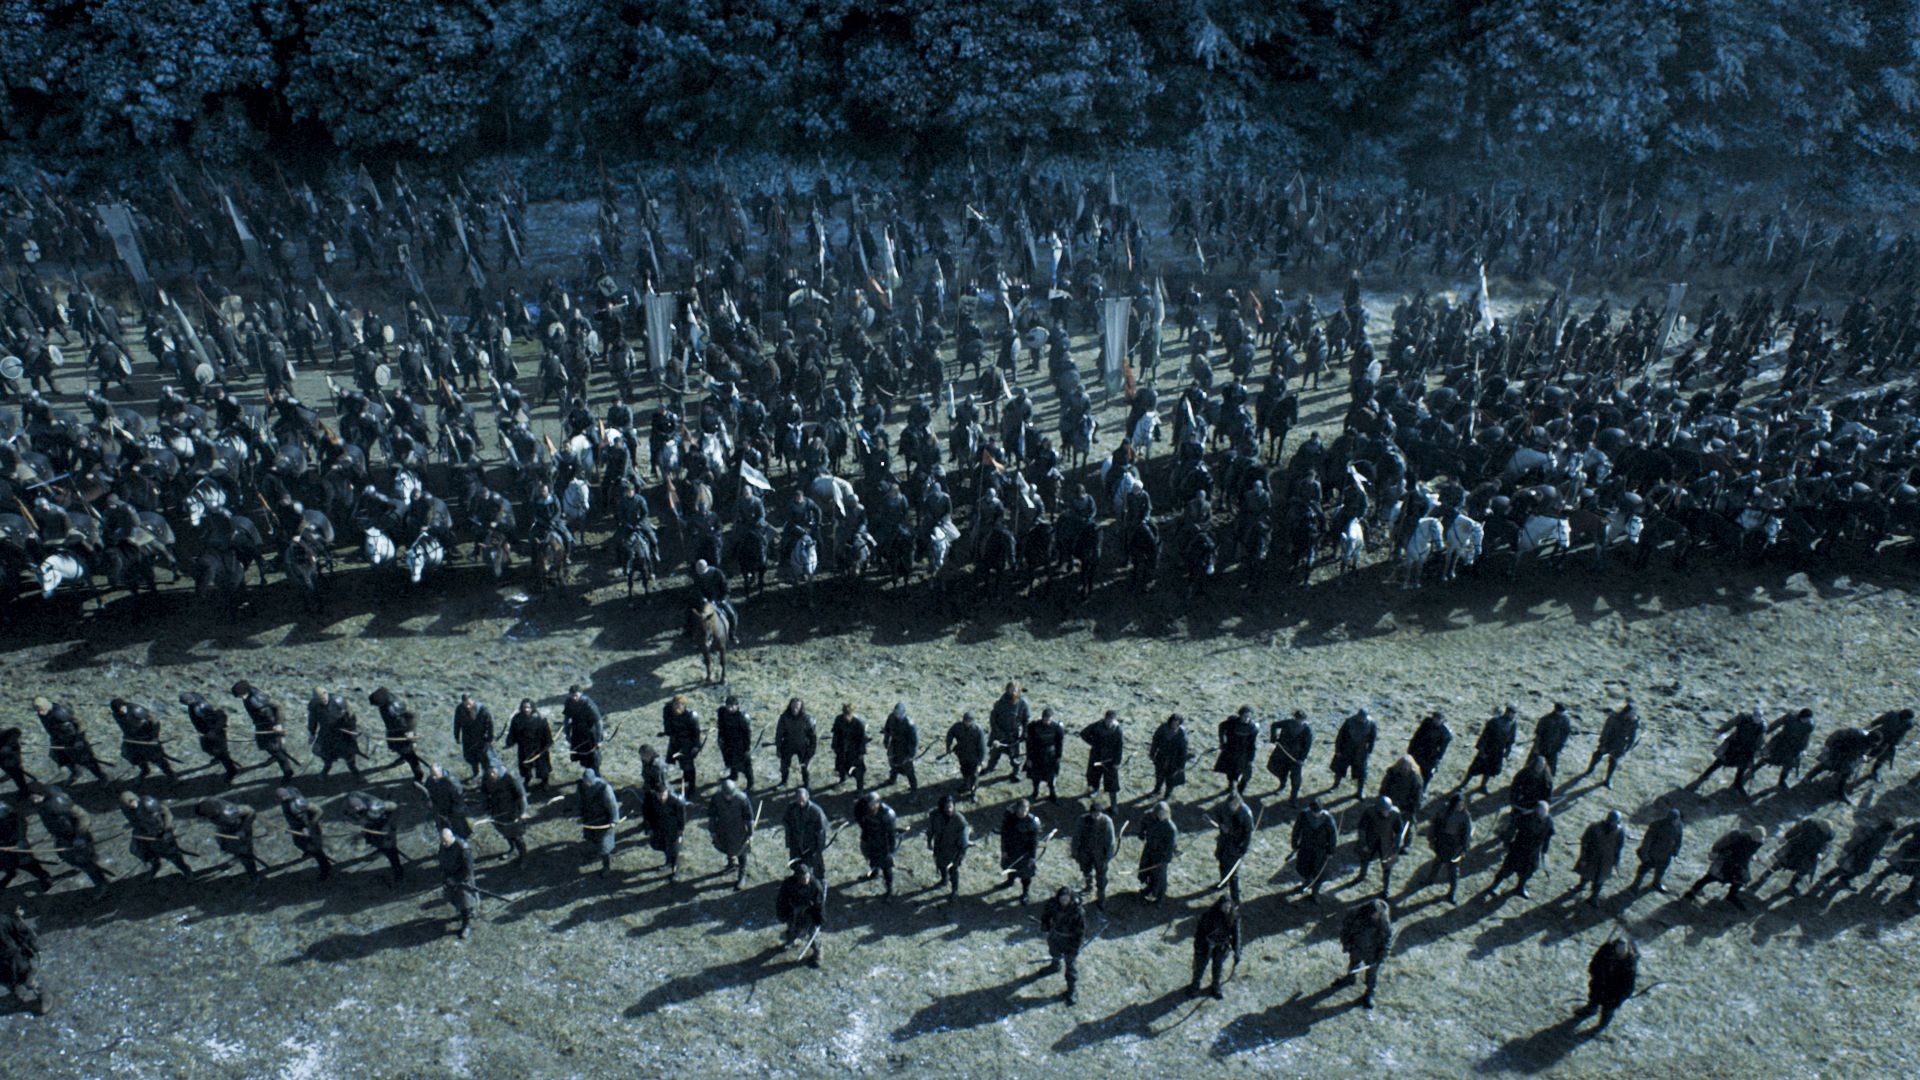 Game of Thrones: Numbers Behind the 'Battle of the Bastards'